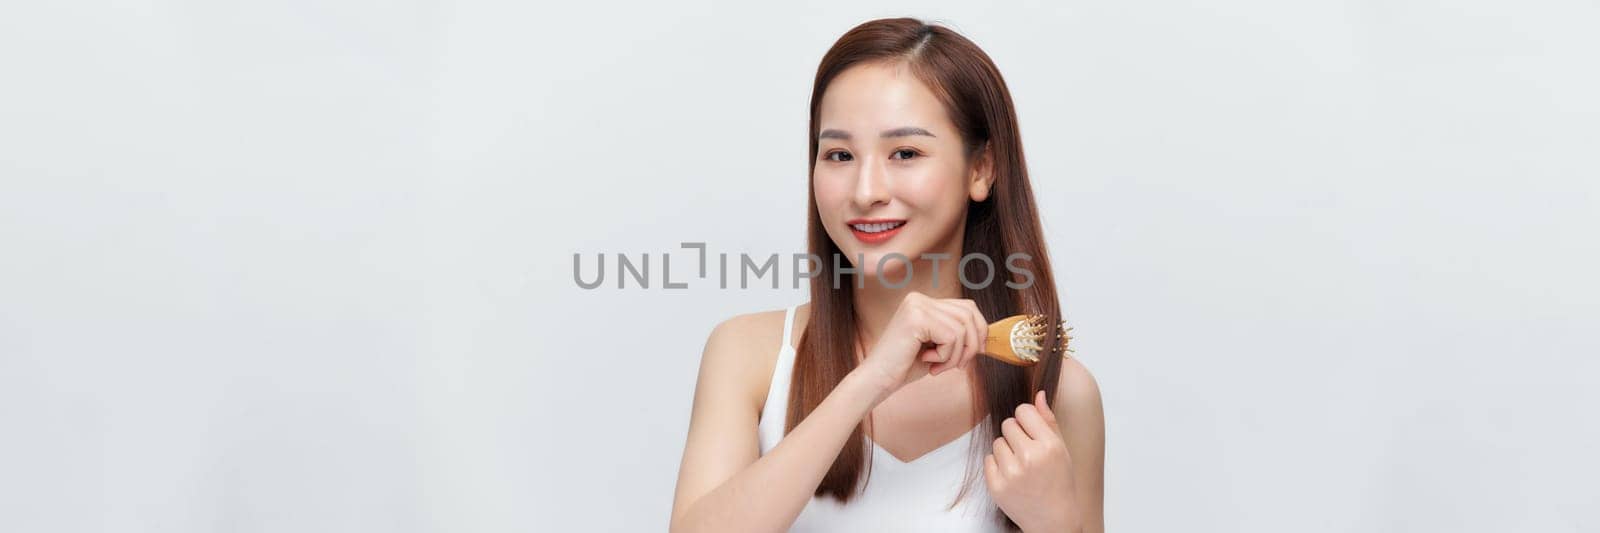 girl with hair comb isolated over white banner background